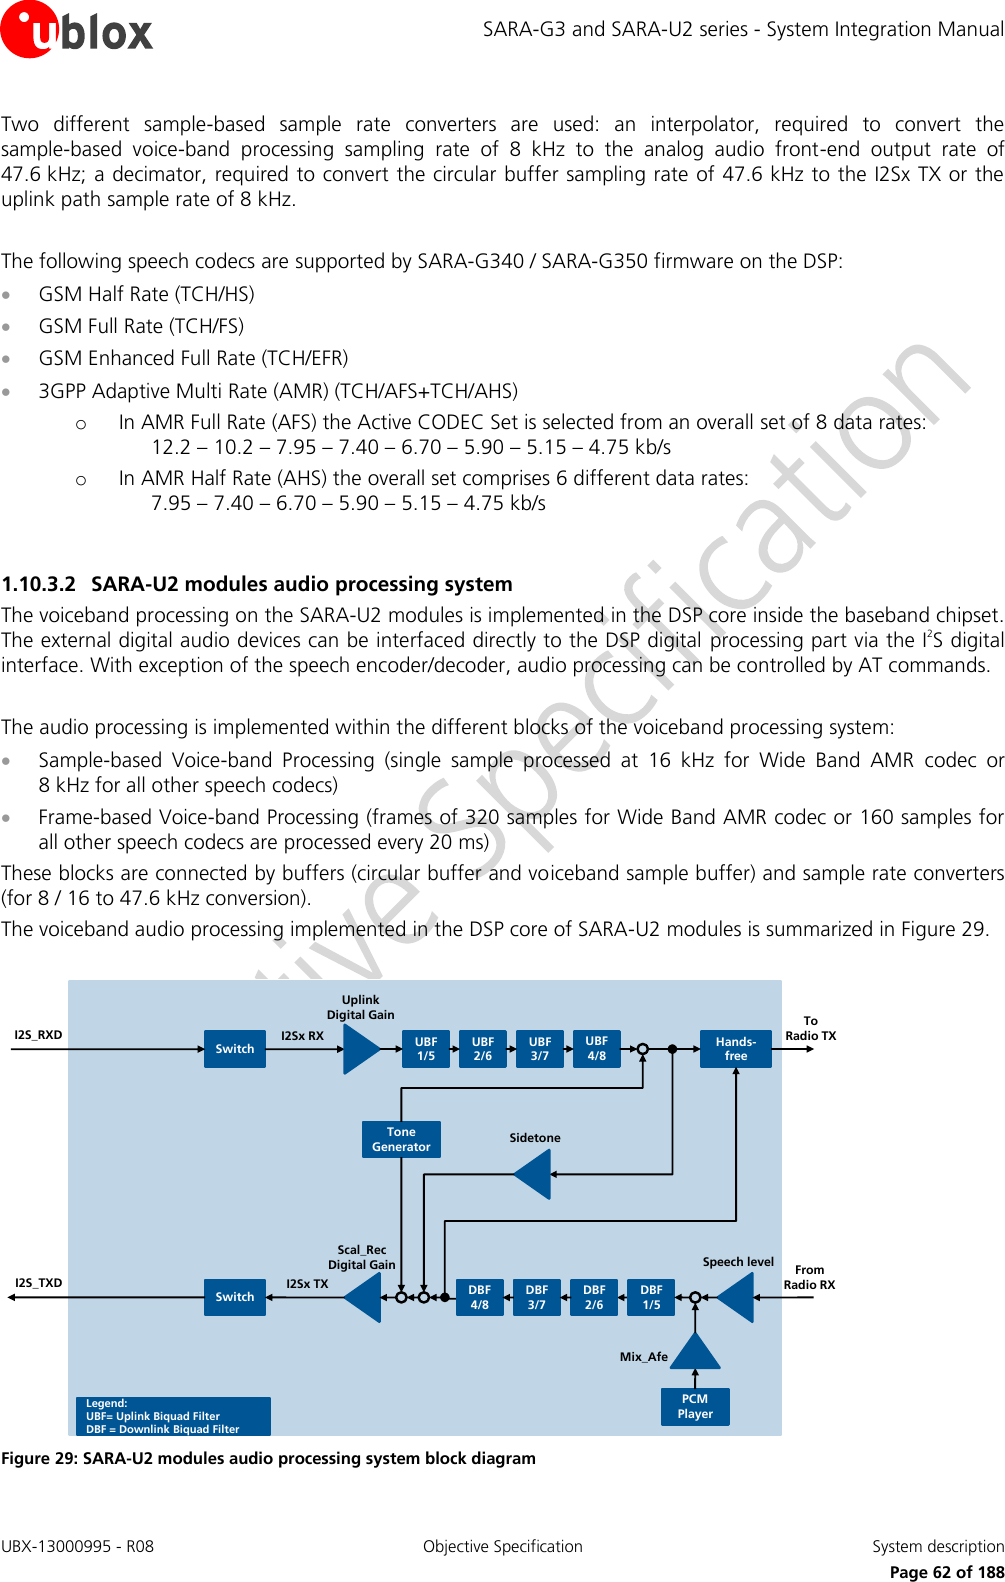 SARA-G3 and SARA-U2 series - System Integration Manual UBX-13000995 - R08  Objective Specification  System description     Page 62 of 188 Two  different  sample-based  sample  rate  converters  are  used:  an  interpolator,  required  to  convert  the sample-based  voice-band  processing  sampling  rate  of  8  kHz  to  the  analog  audio  front-end  output  rate  of 47.6 kHz; a decimator, required to convert the circular buffer sampling rate of 47.6 kHz to the I2Sx TX or the uplink path sample rate of 8 kHz.  The following speech codecs are supported by SARA-G340 / SARA-G350 firmware on the DSP:  GSM Half Rate (TCH/HS)  GSM Full Rate (TCH/FS)  GSM Enhanced Full Rate (TCH/EFR)  3GPP Adaptive Multi Rate (AMR) (TCH/AFS+TCH/AHS) o In AMR Full Rate (AFS) the Active CODEC Set is selected from an overall set of 8 data rates:  12.2 – 10.2 – 7.95 – 7.40 – 6.70 – 5.90 – 5.15 – 4.75 kb/s o In AMR Half Rate (AHS) the overall set comprises 6 different data rates:     7.95 – 7.40 – 6.70 – 5.90 – 5.15 – 4.75 kb/s  1.10.3.2 SARA-U2 modules audio processing system The voiceband processing on the SARA-U2 modules is implemented in the DSP core inside the baseband chipset. The external digital audio devices can be interfaced directly to the DSP digital  processing part via the I2S digital interface. With exception of the speech encoder/decoder, audio processing can be controlled by AT commands.  The audio processing is implemented within the different blocks of the voiceband processing system:  Sample-based  Voice-band  Processing  (single  sample  processed  at  16  kHz  for  Wide  Band  AMR  codec  or 8 kHz for all other speech codecs)  Frame-based Voice-band Processing (frames of 320 samples for Wide Band AMR codec or 160 samples for all other speech codecs are processed every 20 ms) These blocks are connected by buffers (circular buffer and voiceband sample buffer) and sample rate converters (for 8 / 16 to 47.6 kHz conversion). The voiceband audio processing implemented in the DSP core of SARA-U2 modules is summarized in Figure 29.  SwitchI2S_RXD UBF 2/6UBF 1/5Hands-freeTo Radio TXUplinkDigital GainI2S_TXDSwitchScal_Rec Digital GainTone GeneratorI2Sx RX UBF 4/8UBF 3/7DBF 3/7DBF 4/8DBF 1/5DBF 2/6Legend:UBF= Uplink Biquad FilterDBF = Downlink Biquad FilterI2Sx TXSidetoneFrom Radio RXSpeech levelPCM PlayerMix_Afe Figure 29: SARA-U2 modules audio processing system block diagram 